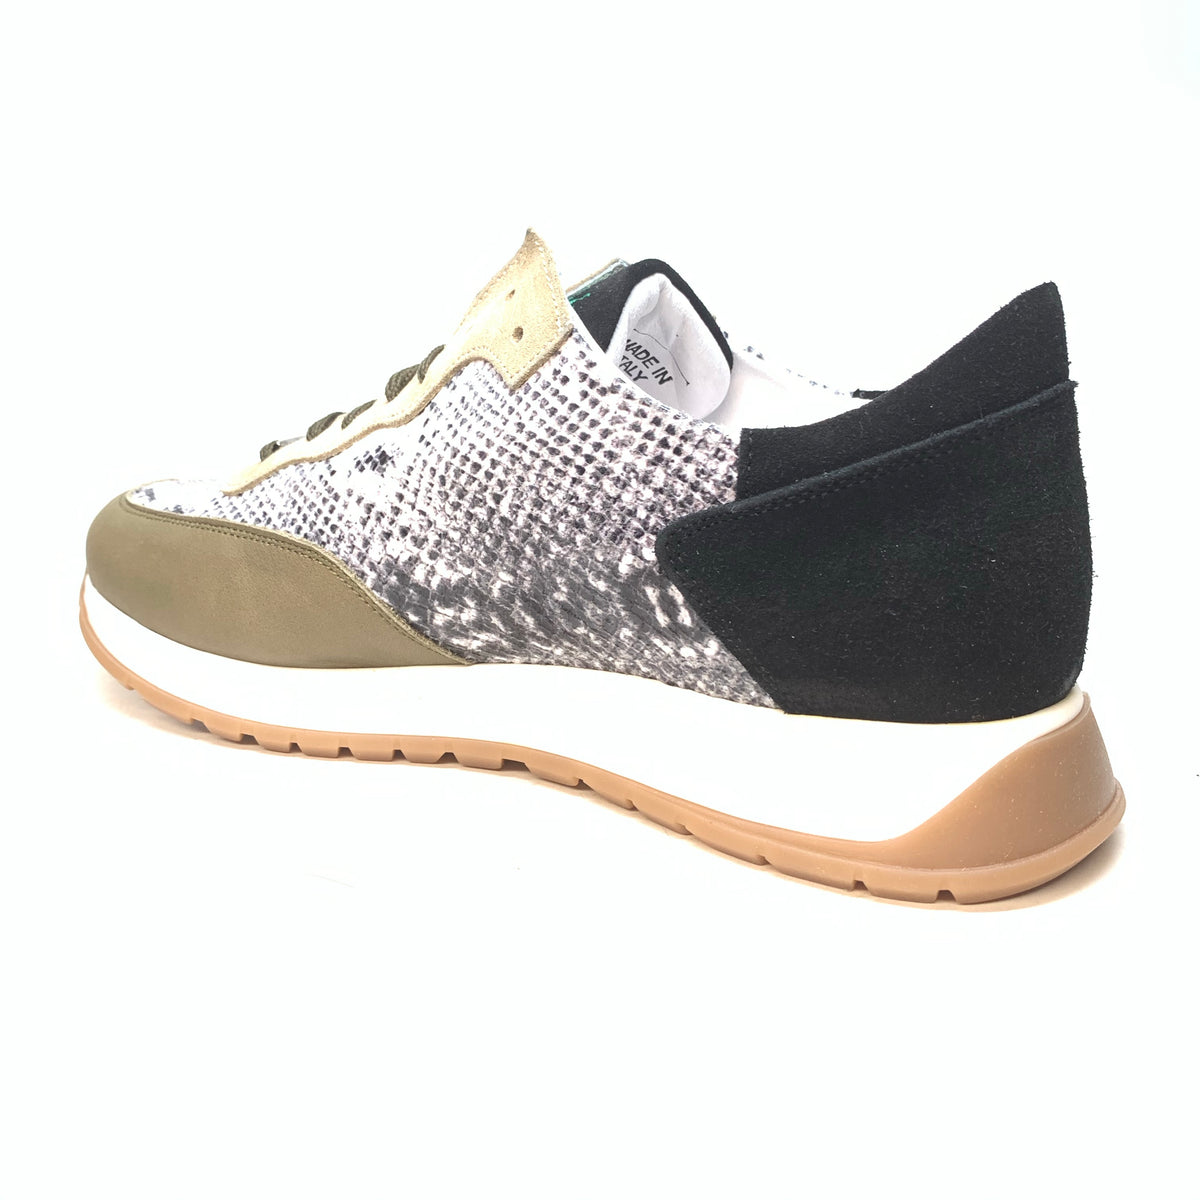 Mauri M728 Calf, Python Print, & Green Suede Sneakers - Dudes Boutique